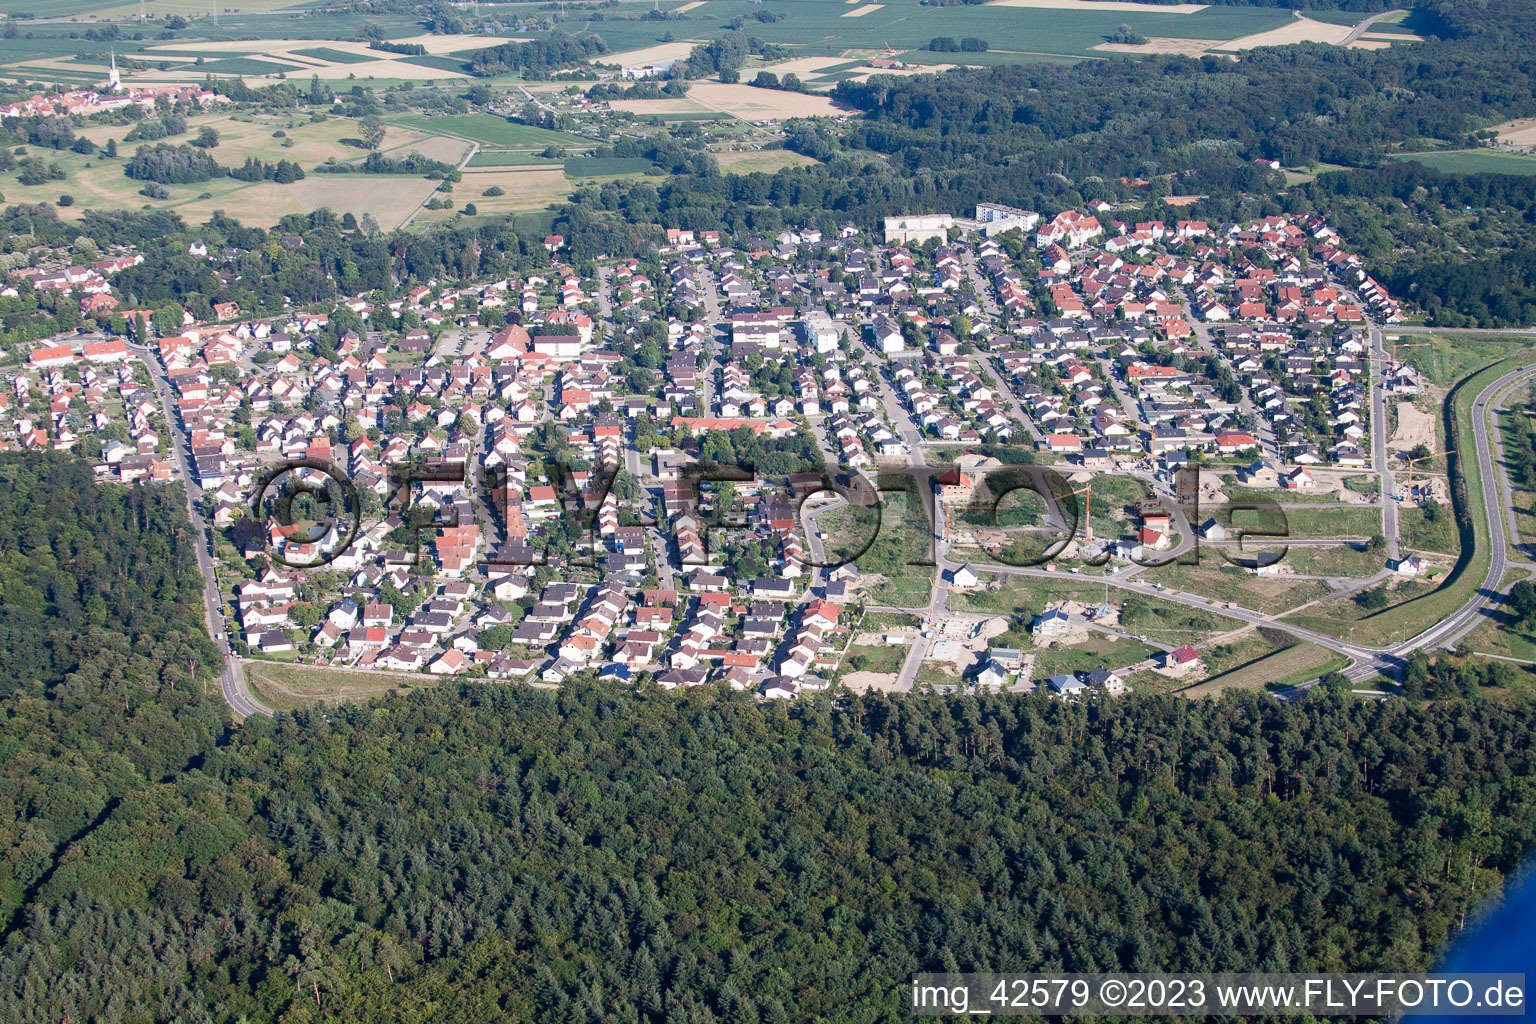 Oblique view of Jockgrim in the state Rhineland-Palatinate, Germany